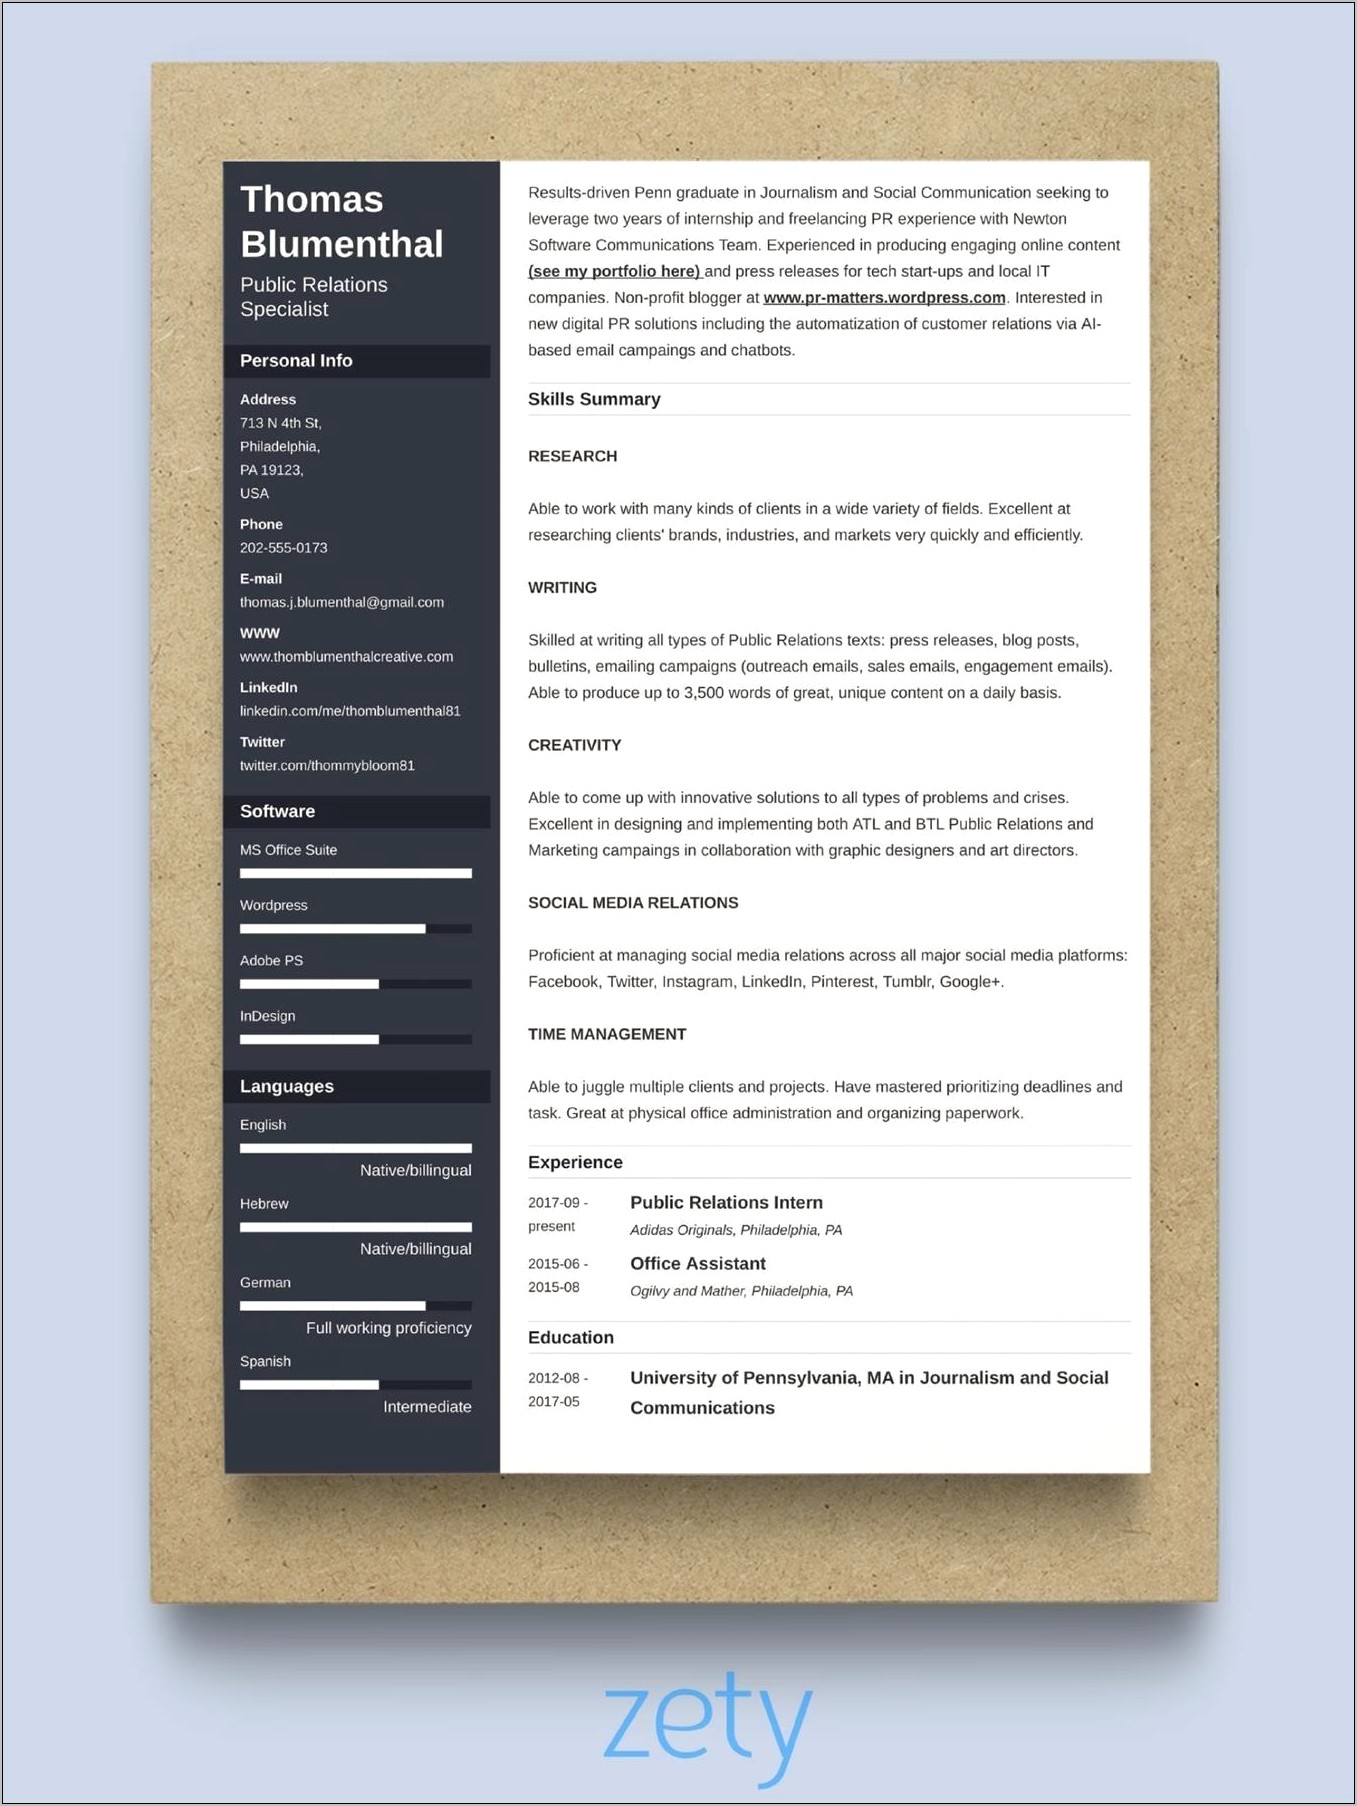 Resume Work Experience Format Examples